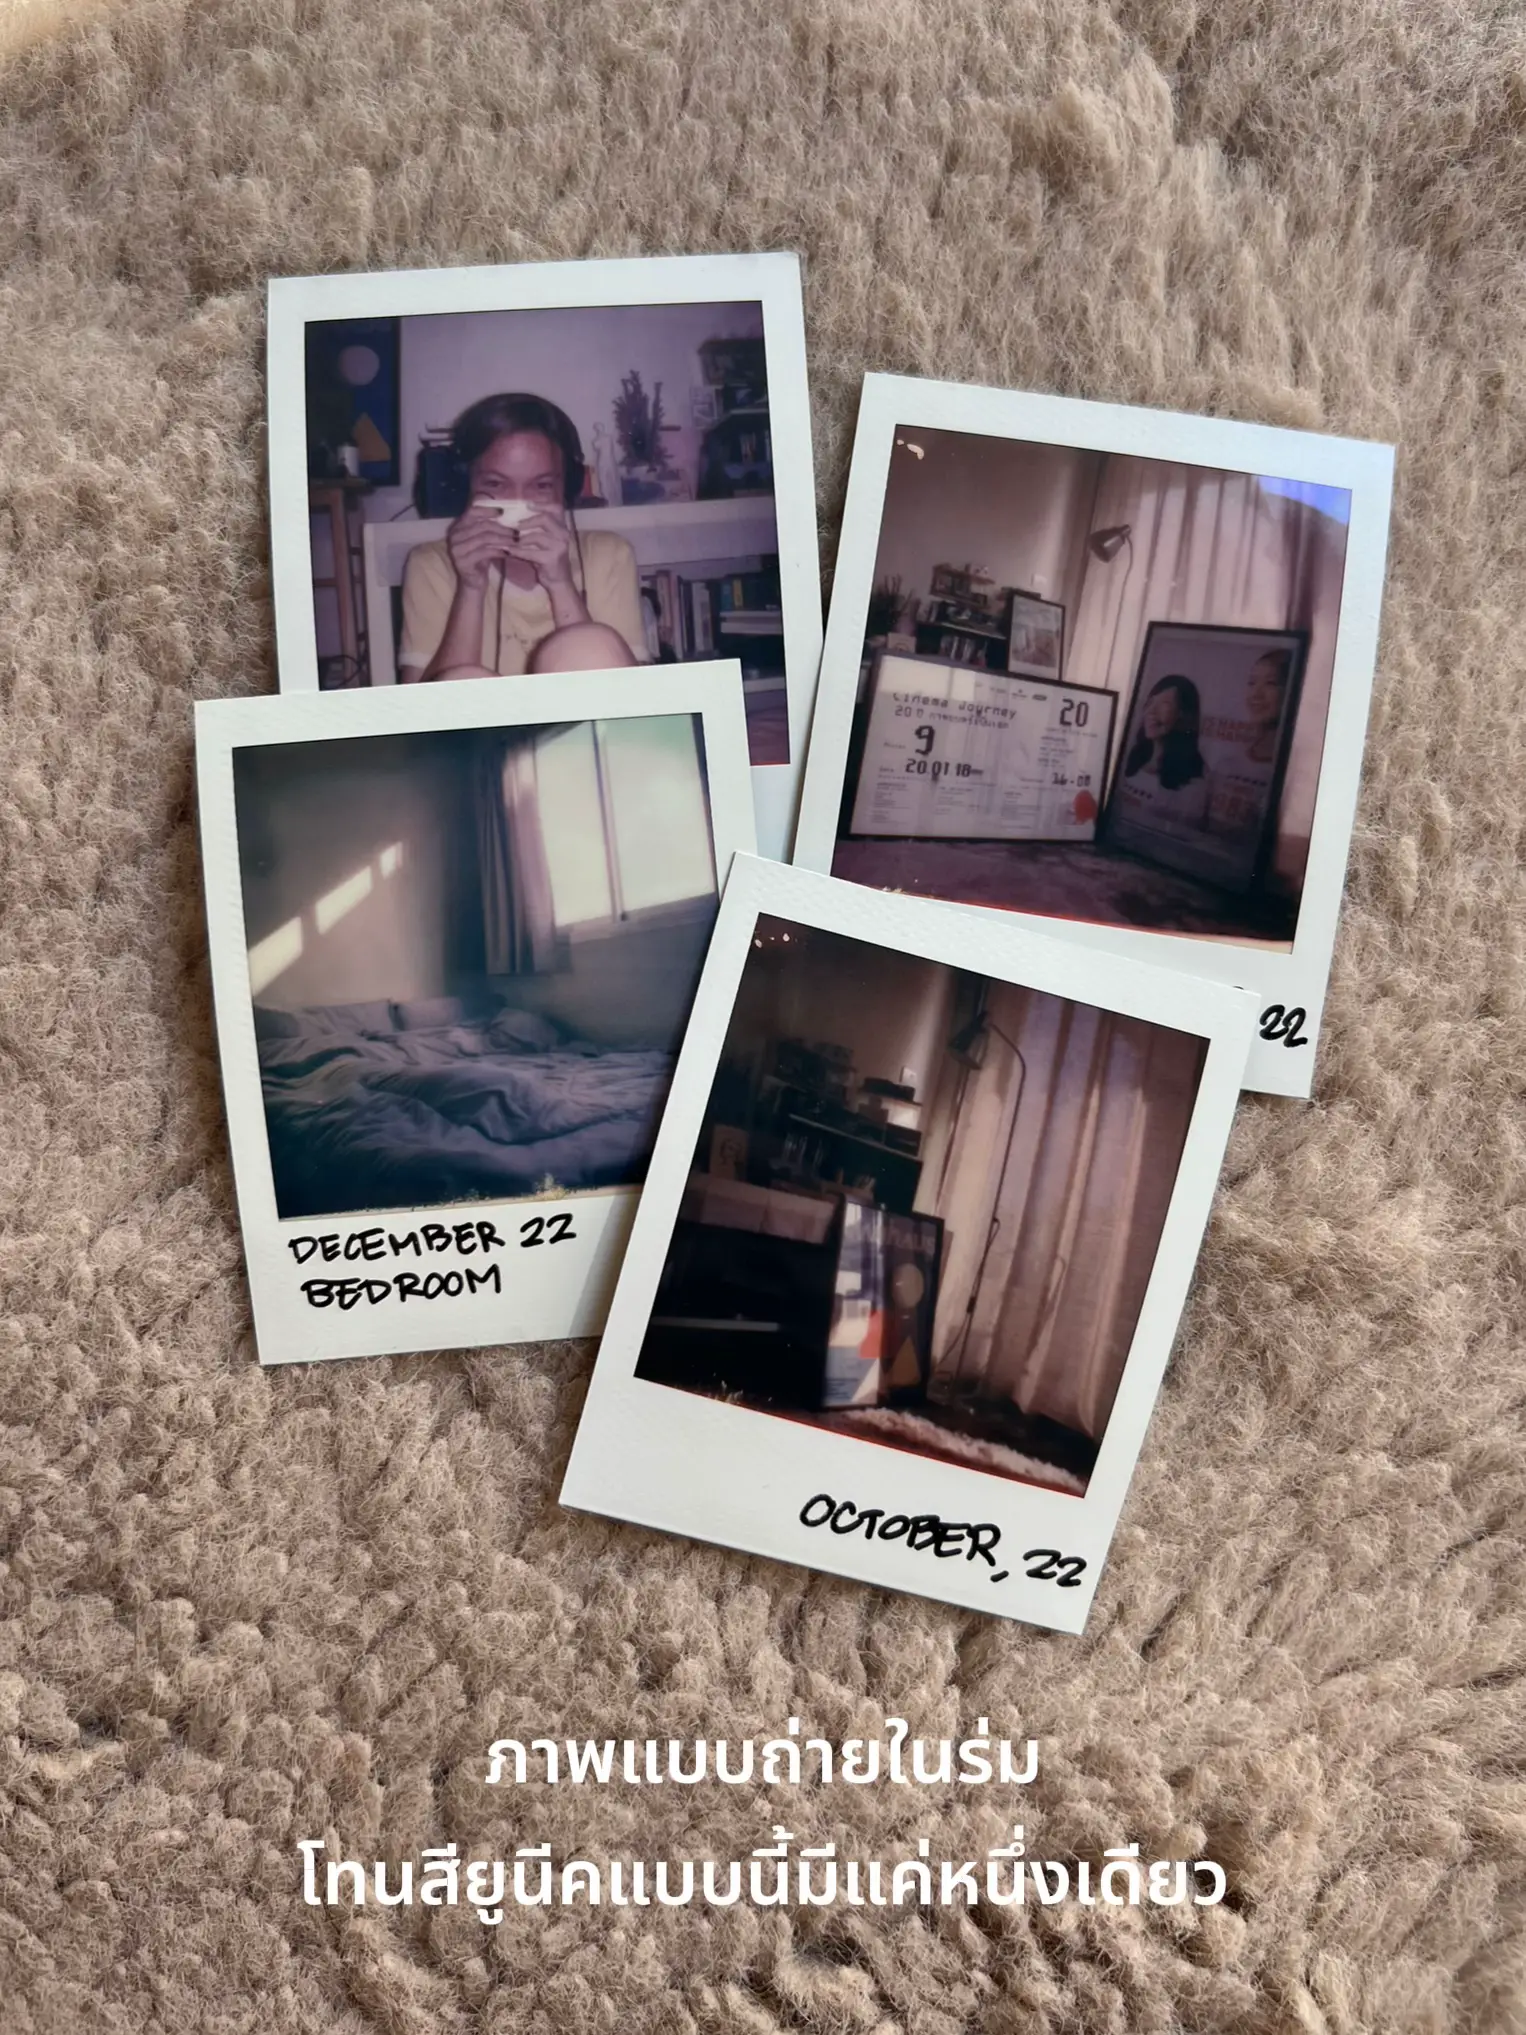 Polaroid Go review: An intentional rejection of Instagram's fake reality